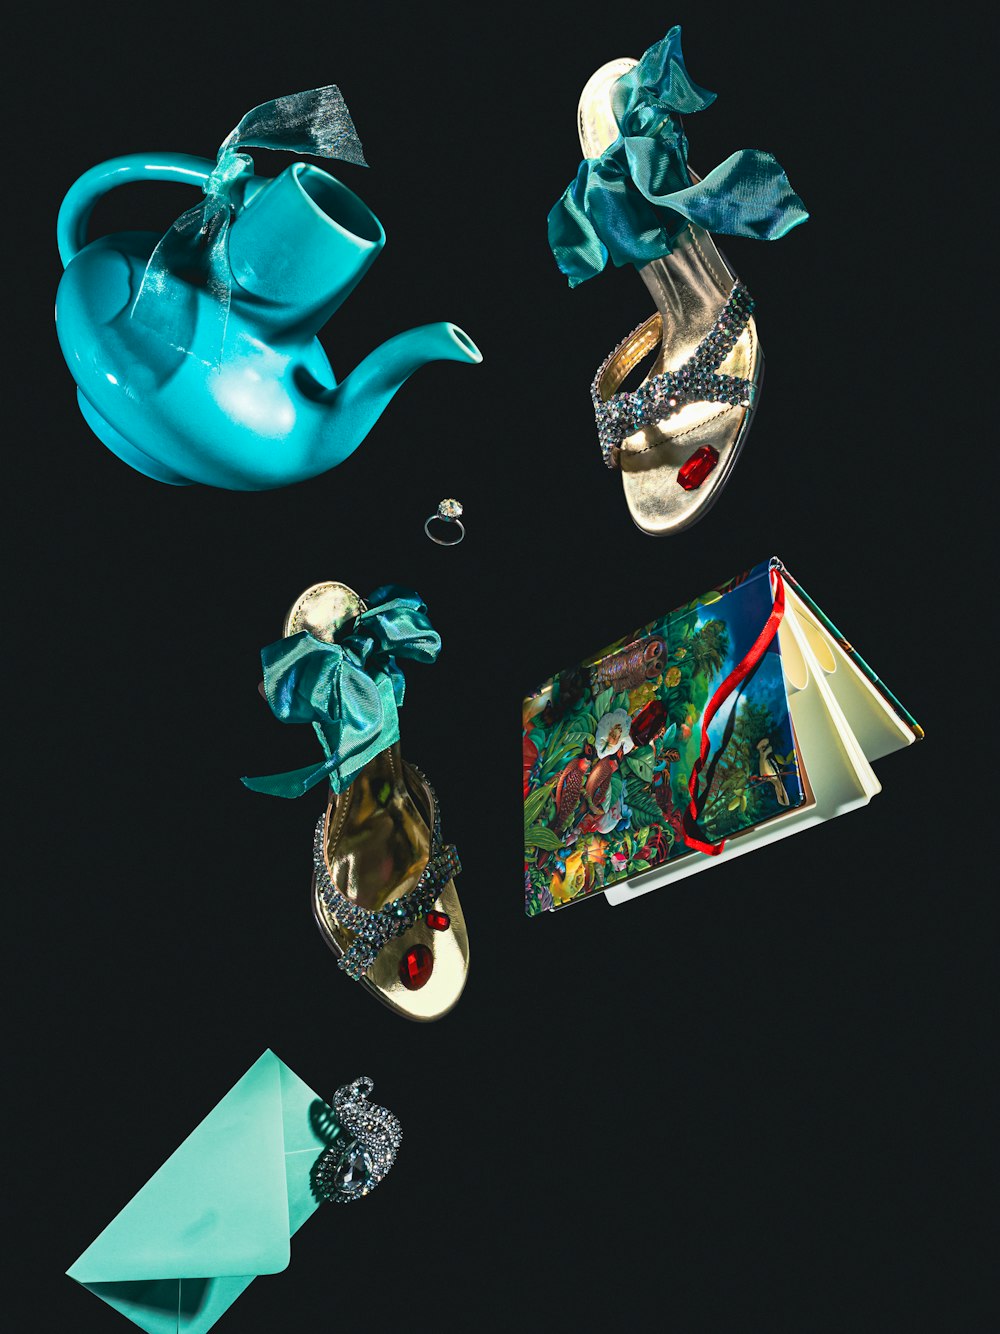 a teapot, a book, and a pair of shoes on a black background